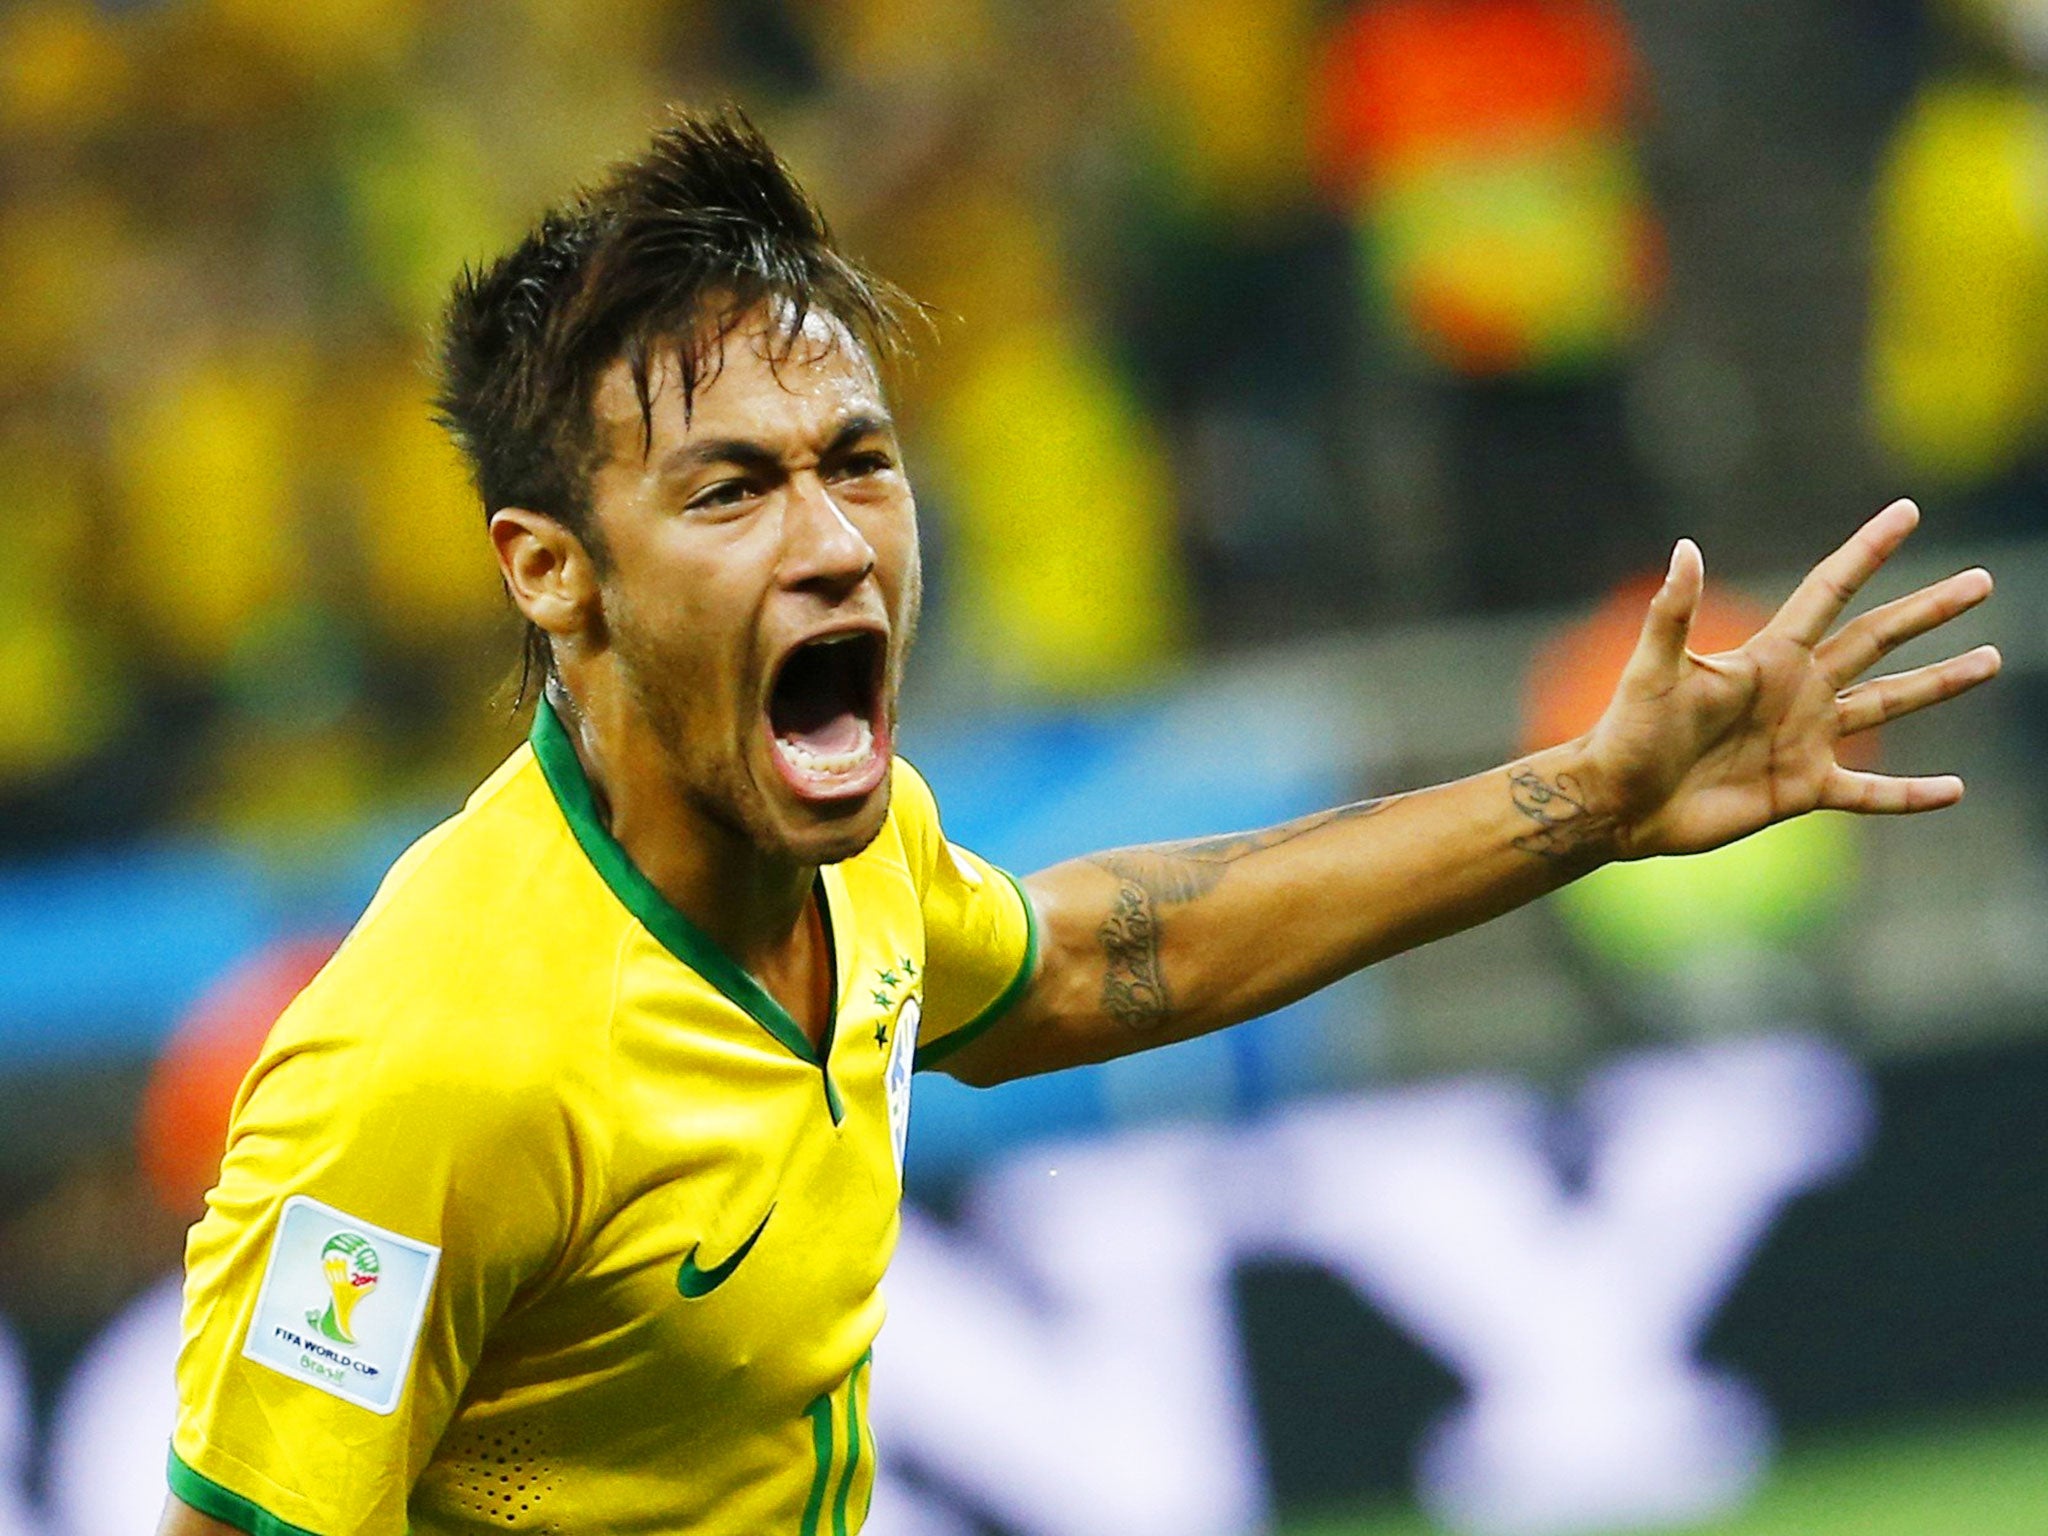 Brazil's Neymar celebrates his goal against Croatia during their 2014 World Cup opening match at the Corinthians arena in Sao Paulo